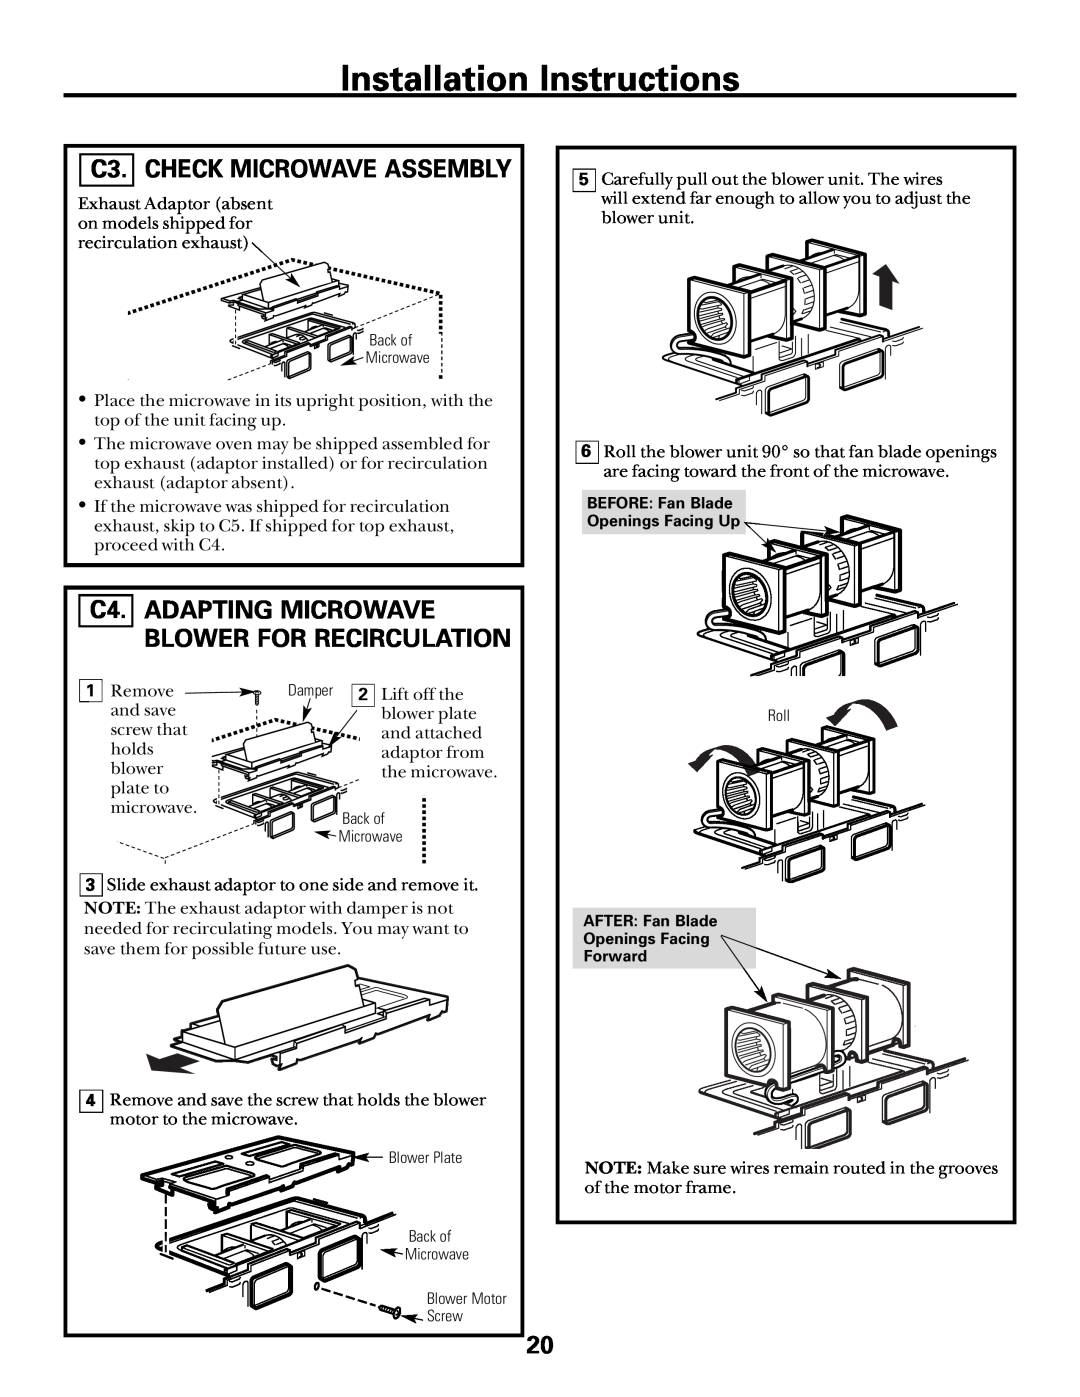 GE Over the Range Microwave Oven manual C3. CHECK MICROWAVE ASSEMBLY, C4. ADAPTING MICROWAVE BLOWER FOR RECIRCULATION 